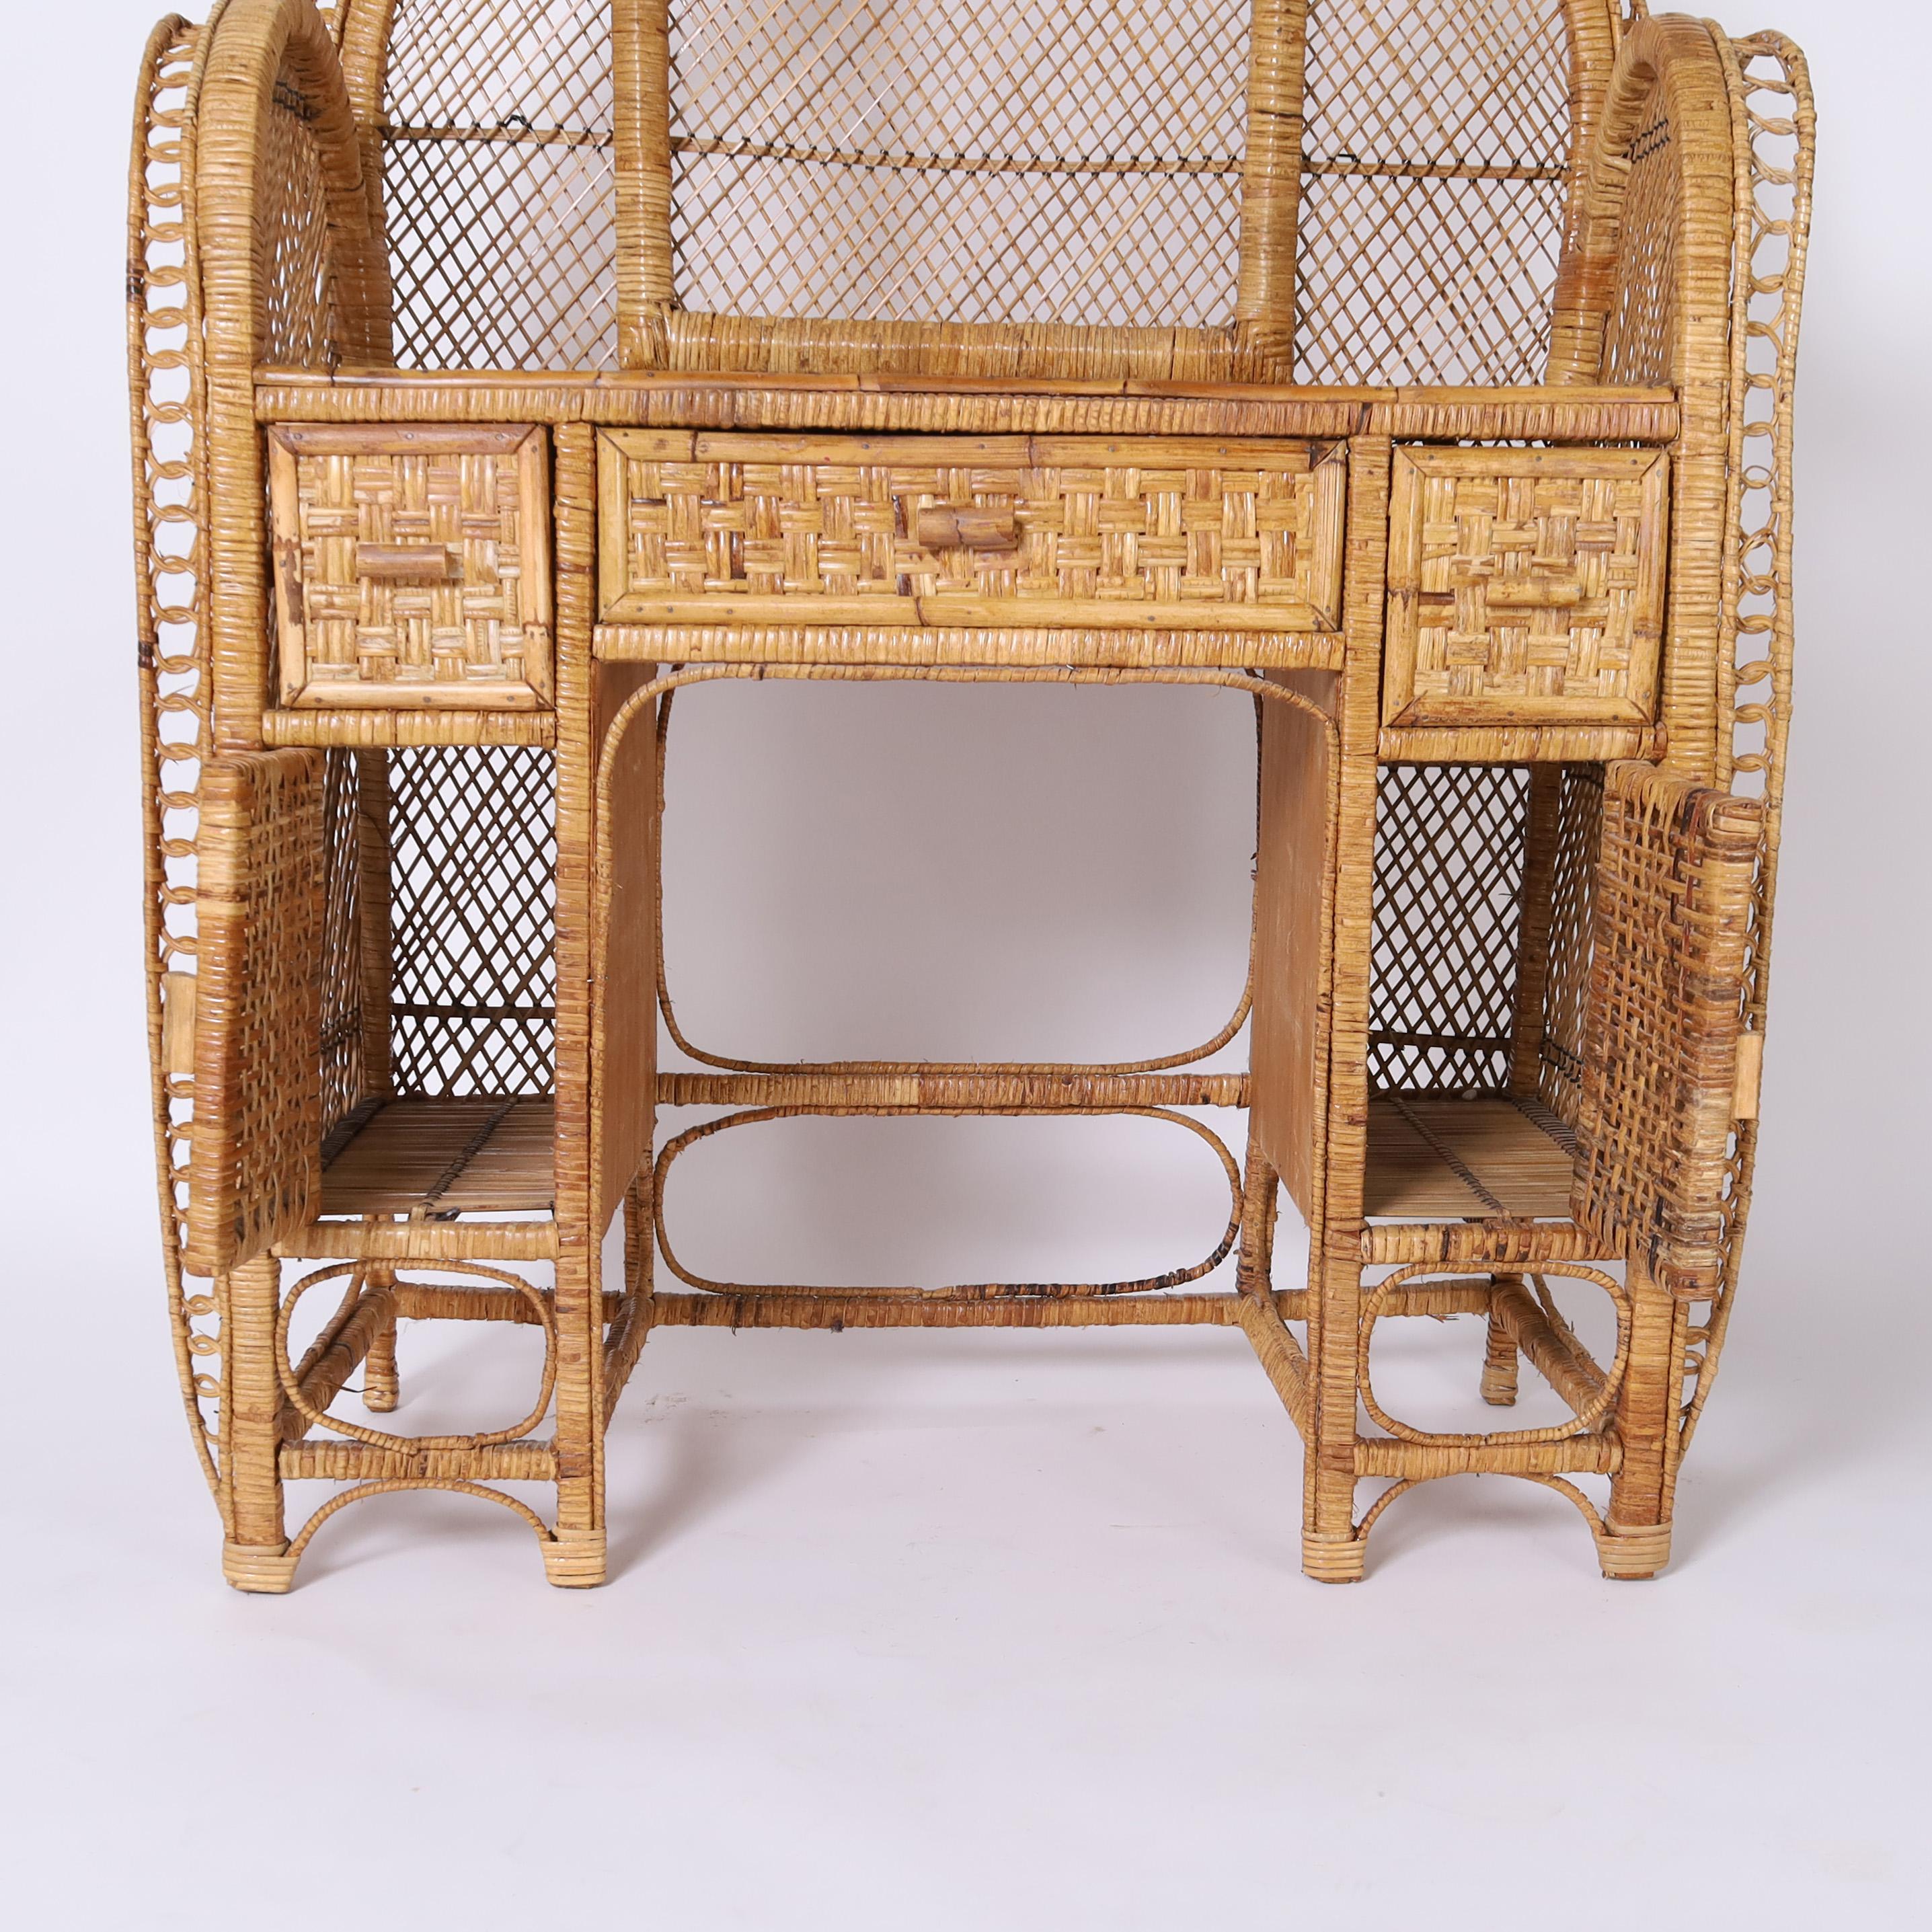 Vintage Anglo Indian Wicker and Rattan Peacock Vanity For Sale 2